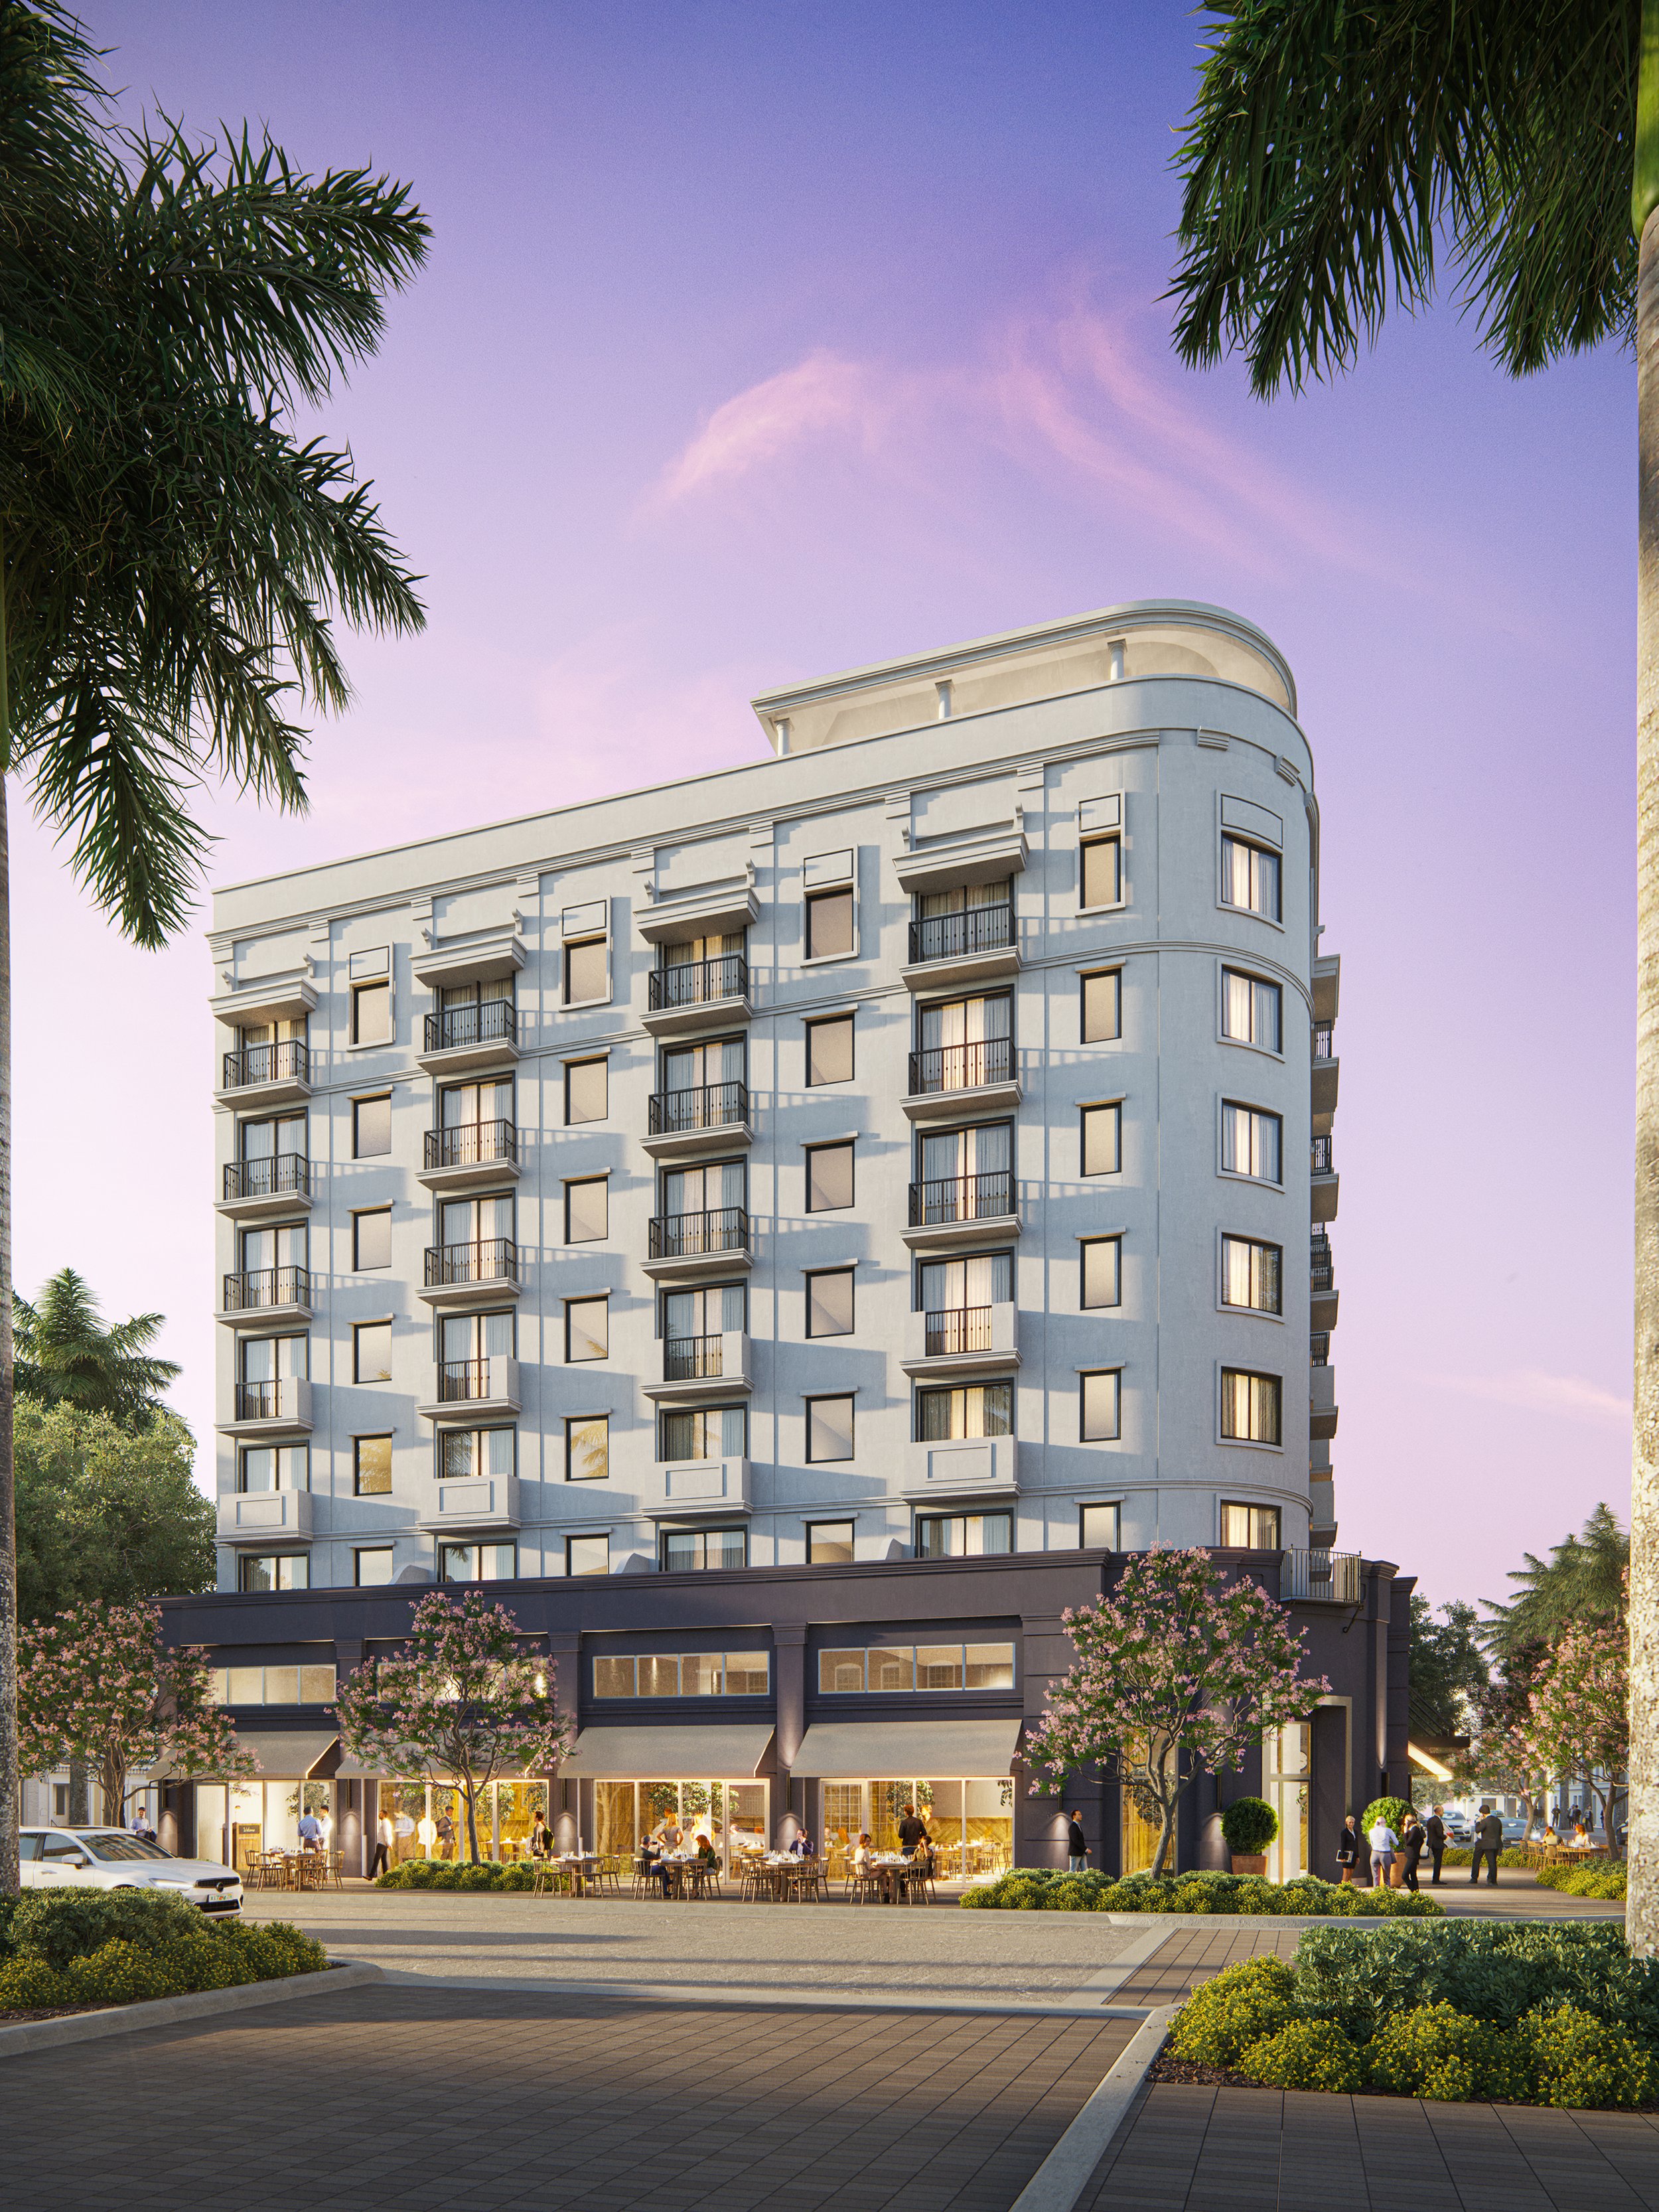 The Avenue Coral Gables Hotel & Residences Reaches 65% Sold 2.jpg